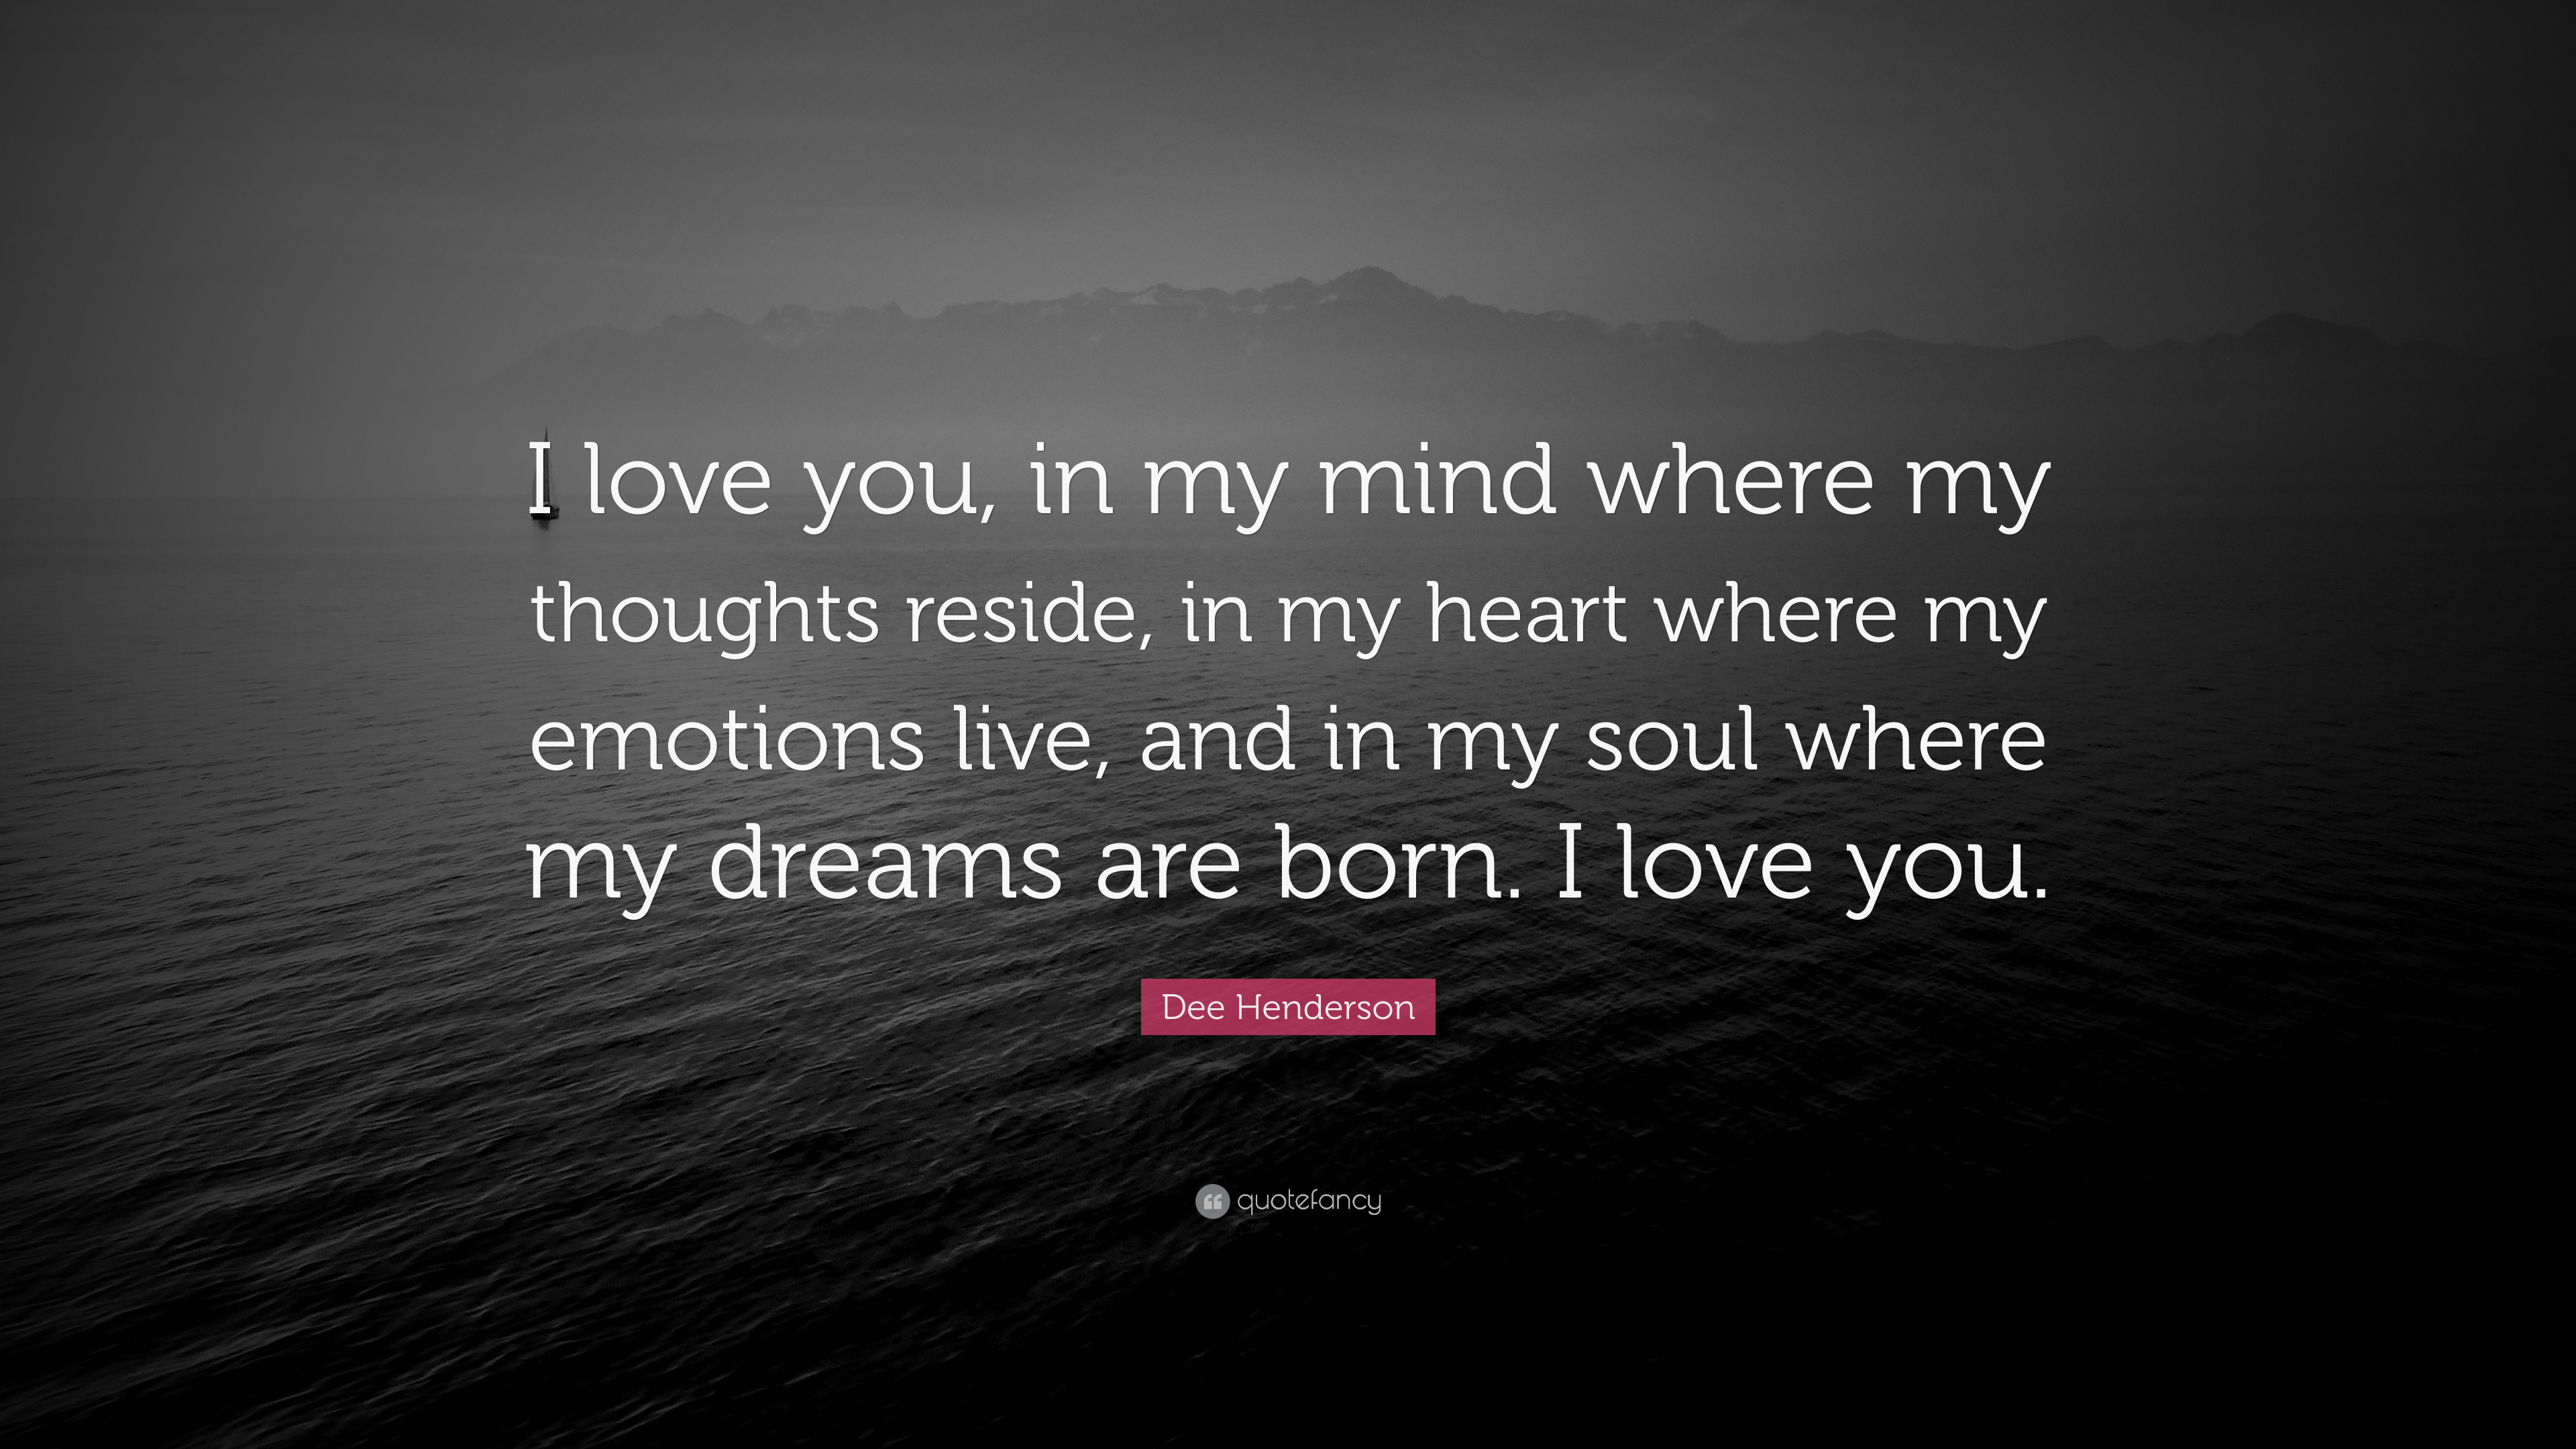 Dee Henderson Quote: “I love you, in my mind where my